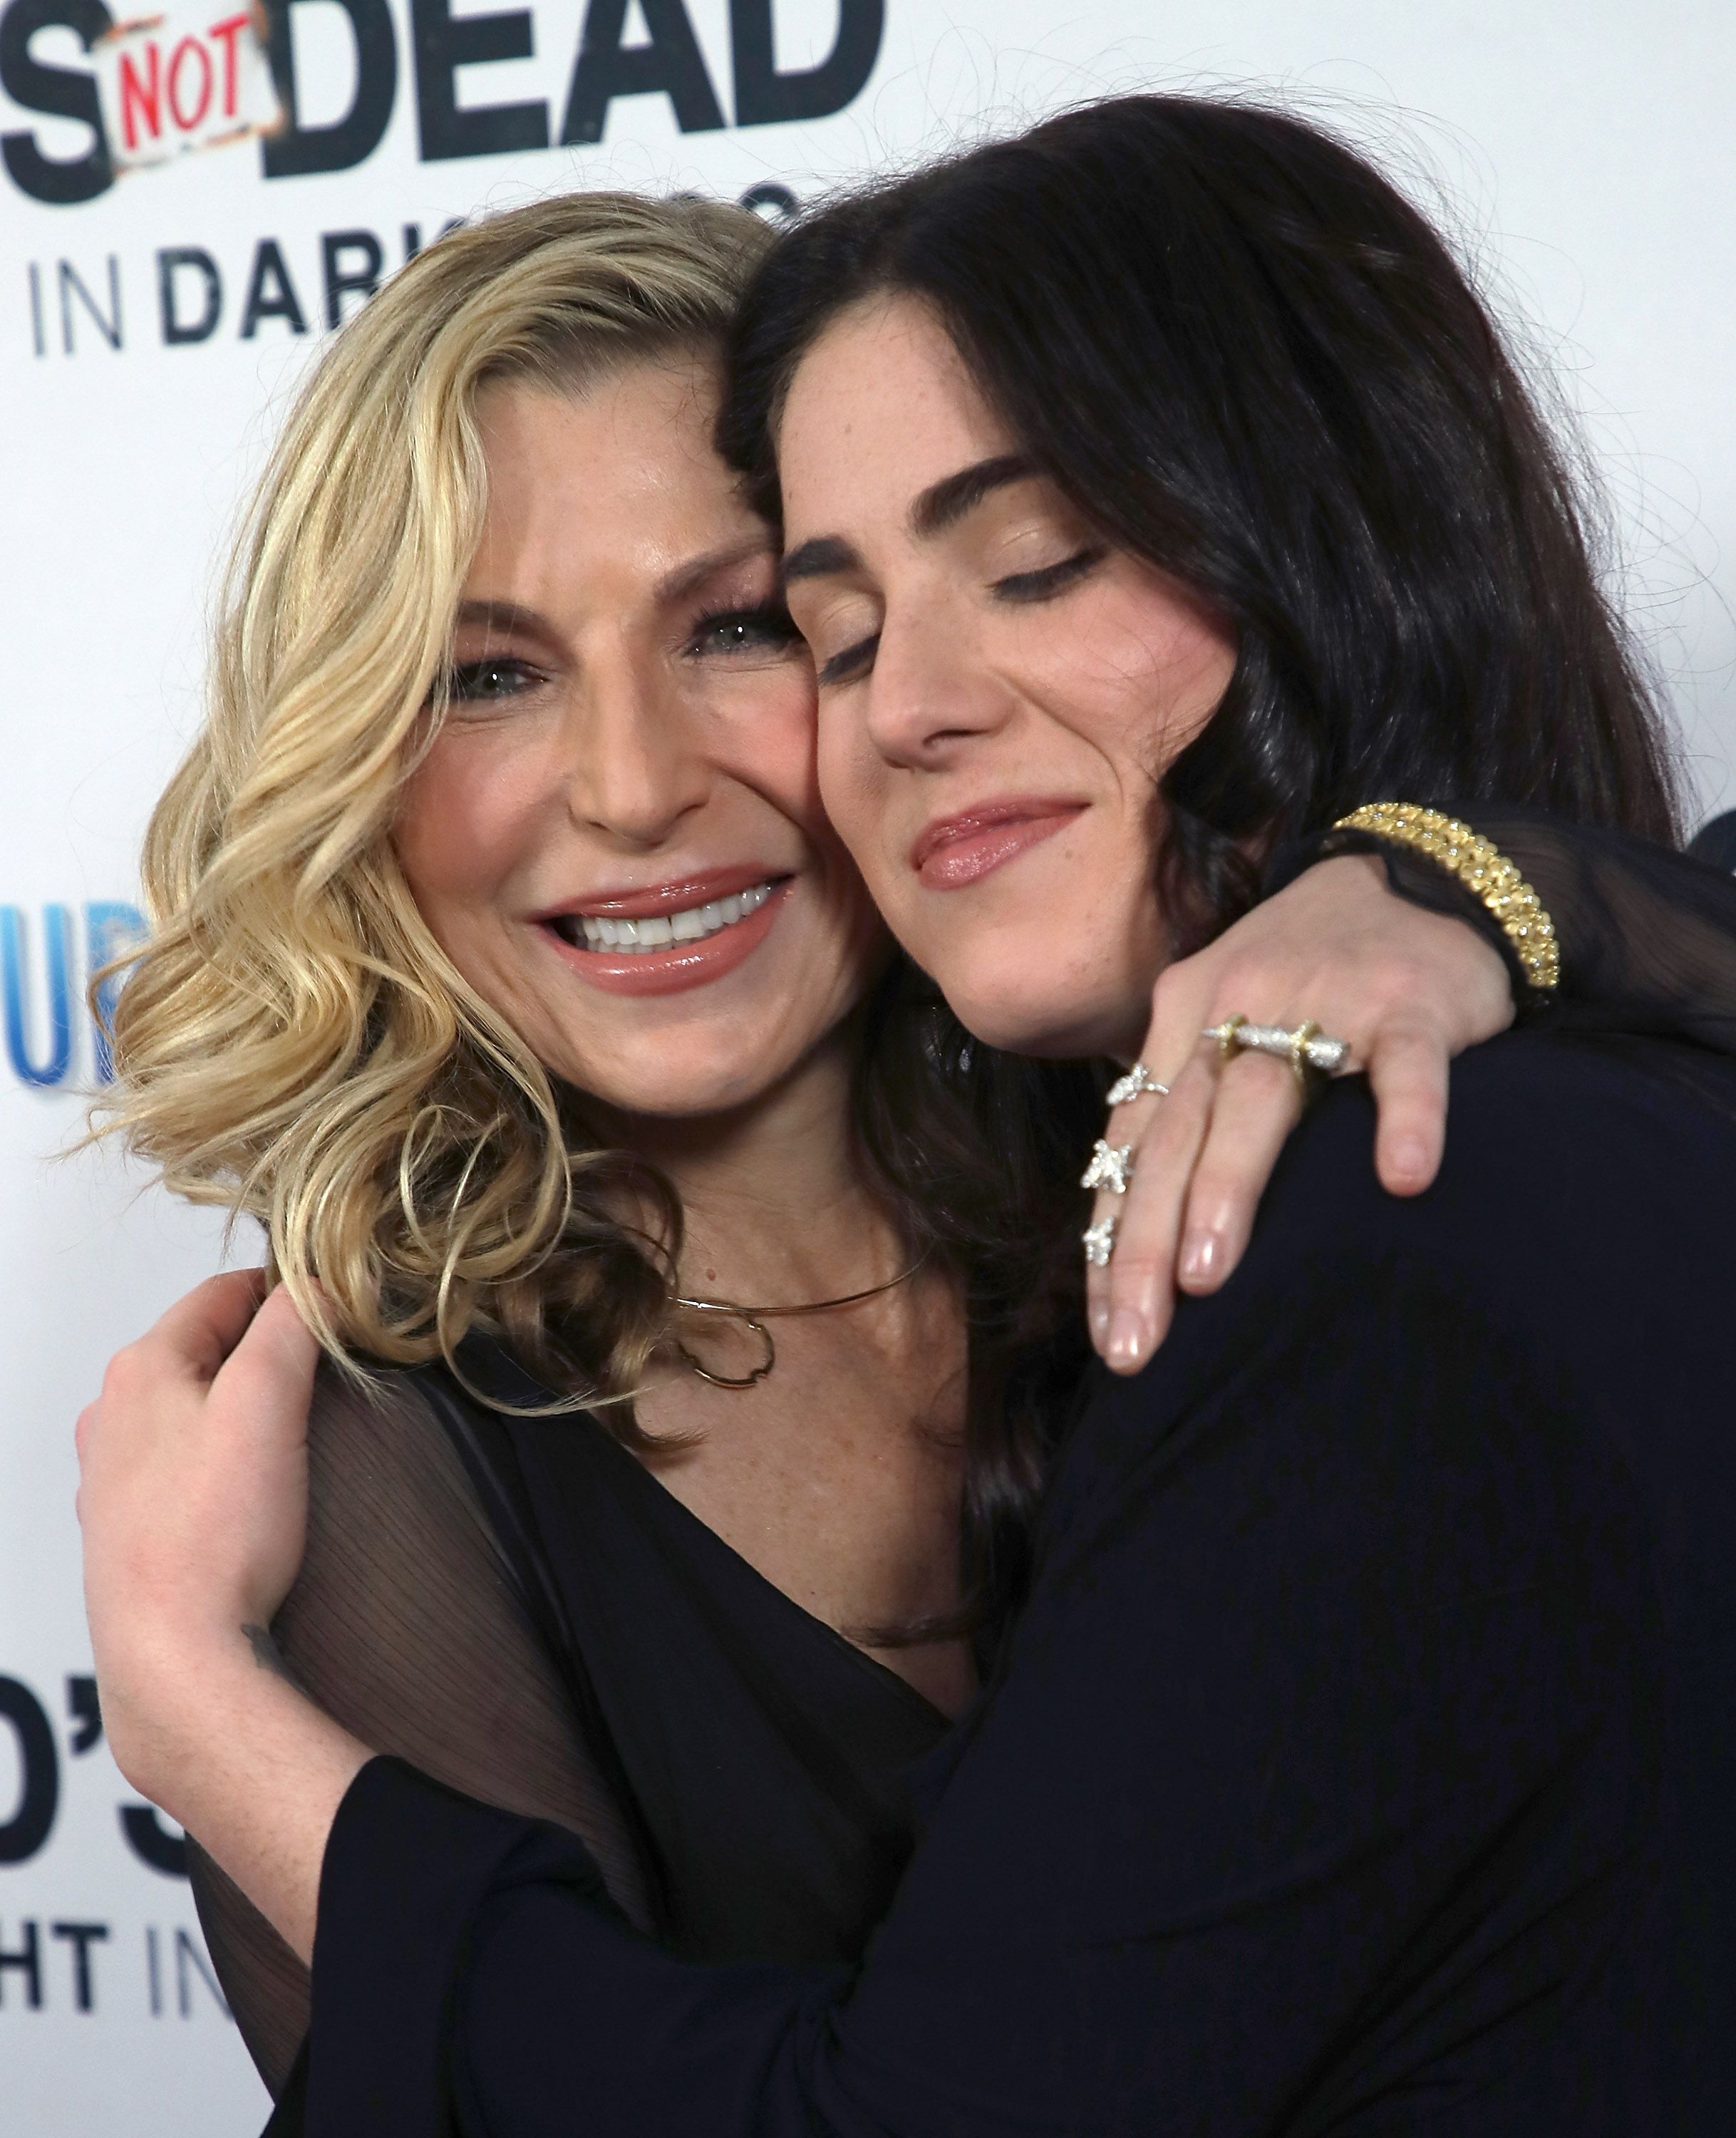 Tatum O'Neal and daughter Emily McEnroe at the premier of "God's Not Dead: A Light in Darkness" in 2018 in Hollywood, California. 